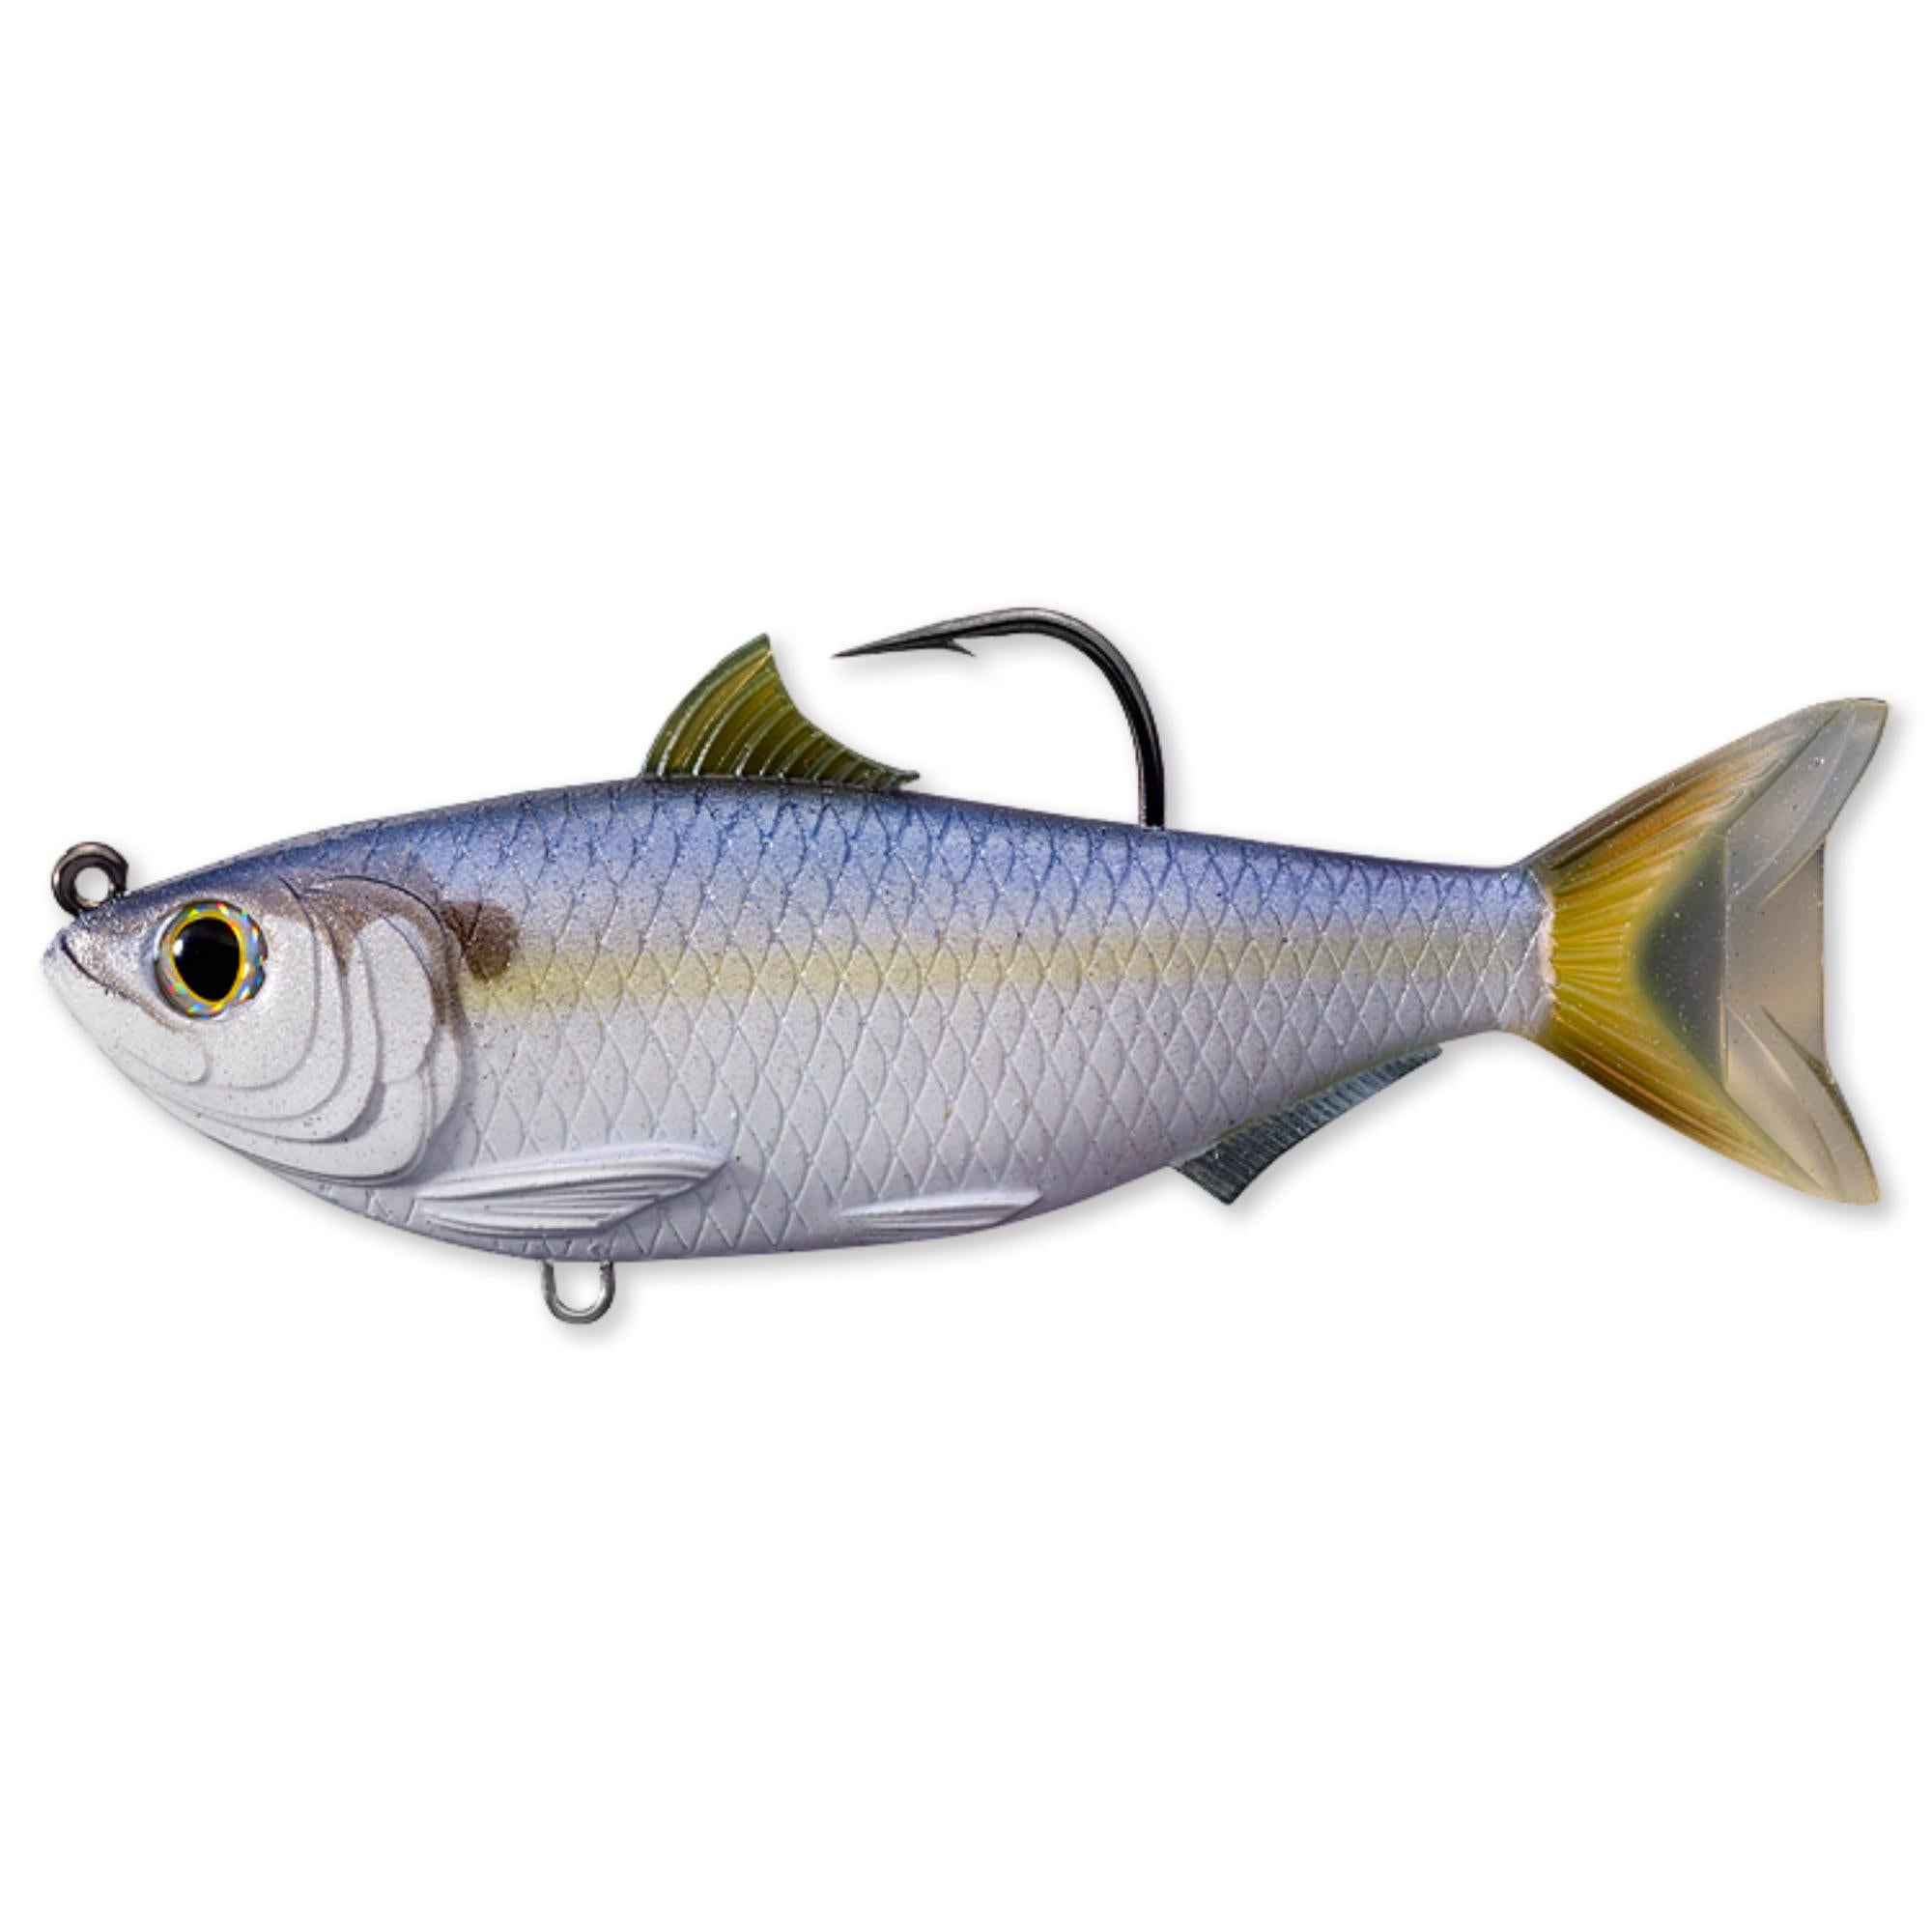  LIVE TARGET ICT Shad- Blade Bait, 2.25, 1/2 oz, Gold/Perch :  Sports & Outdoors